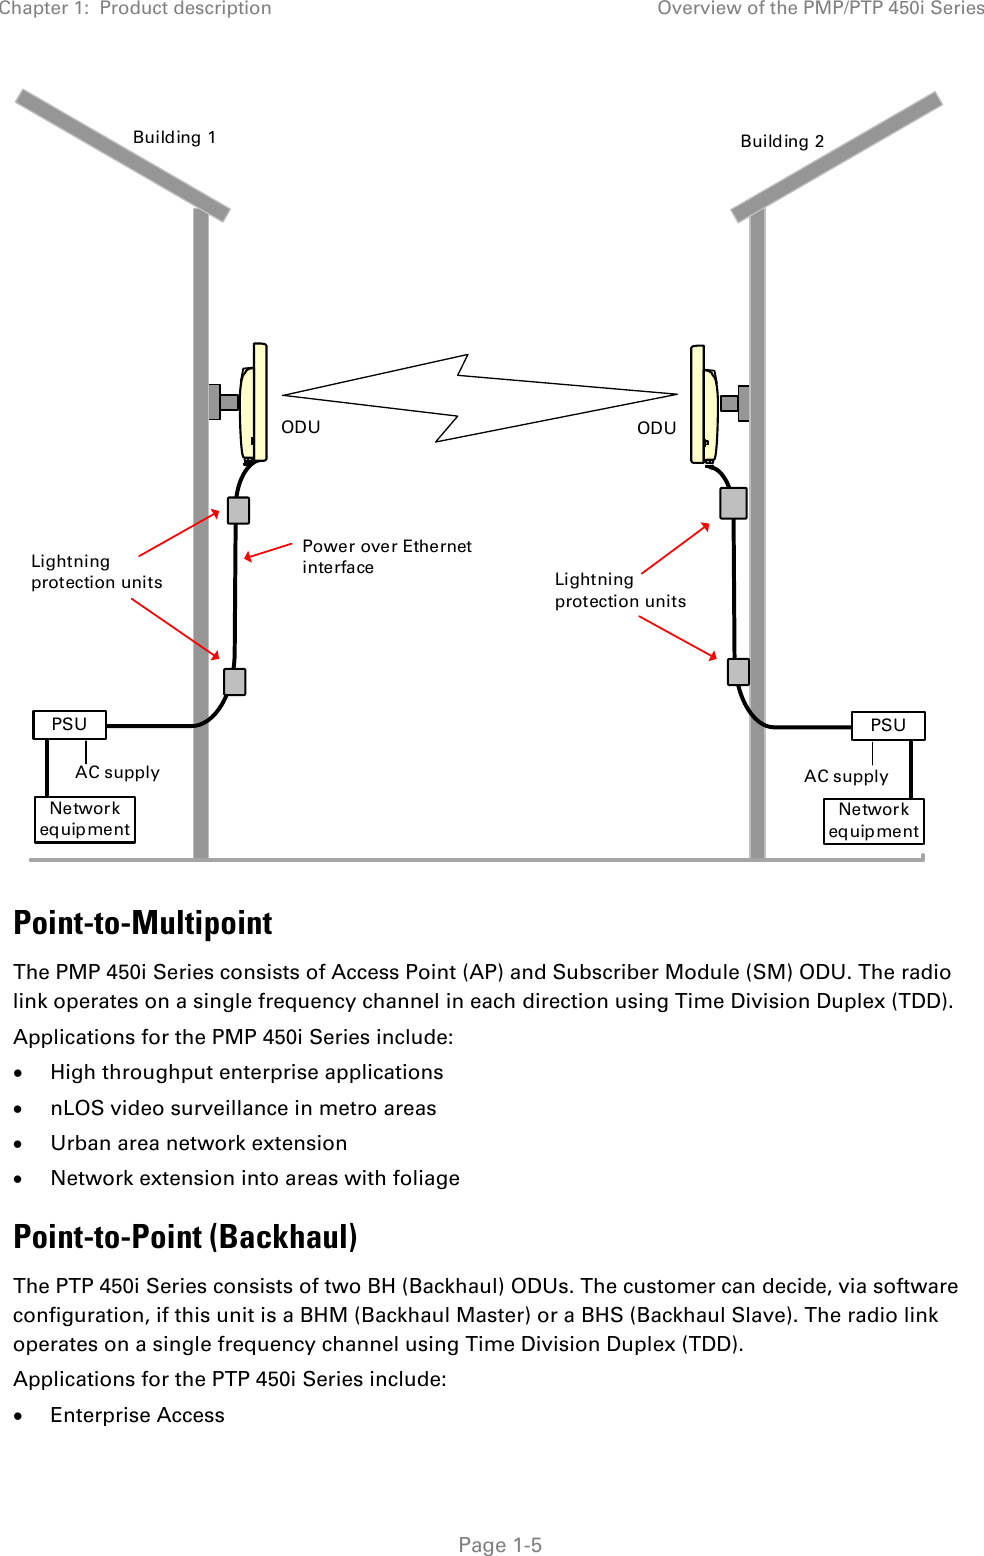 Chapter 1:  Product description Overview of the PMP/PTP 450i Series   Page 1-5 Building 1ODUAC supplyPSUNetworkequipmentBuilding 2ODUPSUNetworkequipmentAC supplyPower over Ethernet interface Lightning protection unitsLightning protection units Point-to-Multipoint The PMP 450i Series consists of Access Point (AP) and Subscriber Module (SM) ODU. The radio link operates on a single frequency channel in each direction using Time Division Duplex (TDD). Applications for the PMP 450i Series include: • High throughput enterprise applications • nLOS video surveillance in metro areas • Urban area network extension • Network extension into areas with foliage Point-to-Point (Backhaul) The PTP 450i Series consists of two BH (Backhaul) ODUs. The customer can decide, via software configuration, if this unit is a BHM (Backhaul Master) or a BHS (Backhaul Slave). The radio link operates on a single frequency channel using Time Division Duplex (TDD). Applications for the PTP 450i Series include: • Enterprise Access 